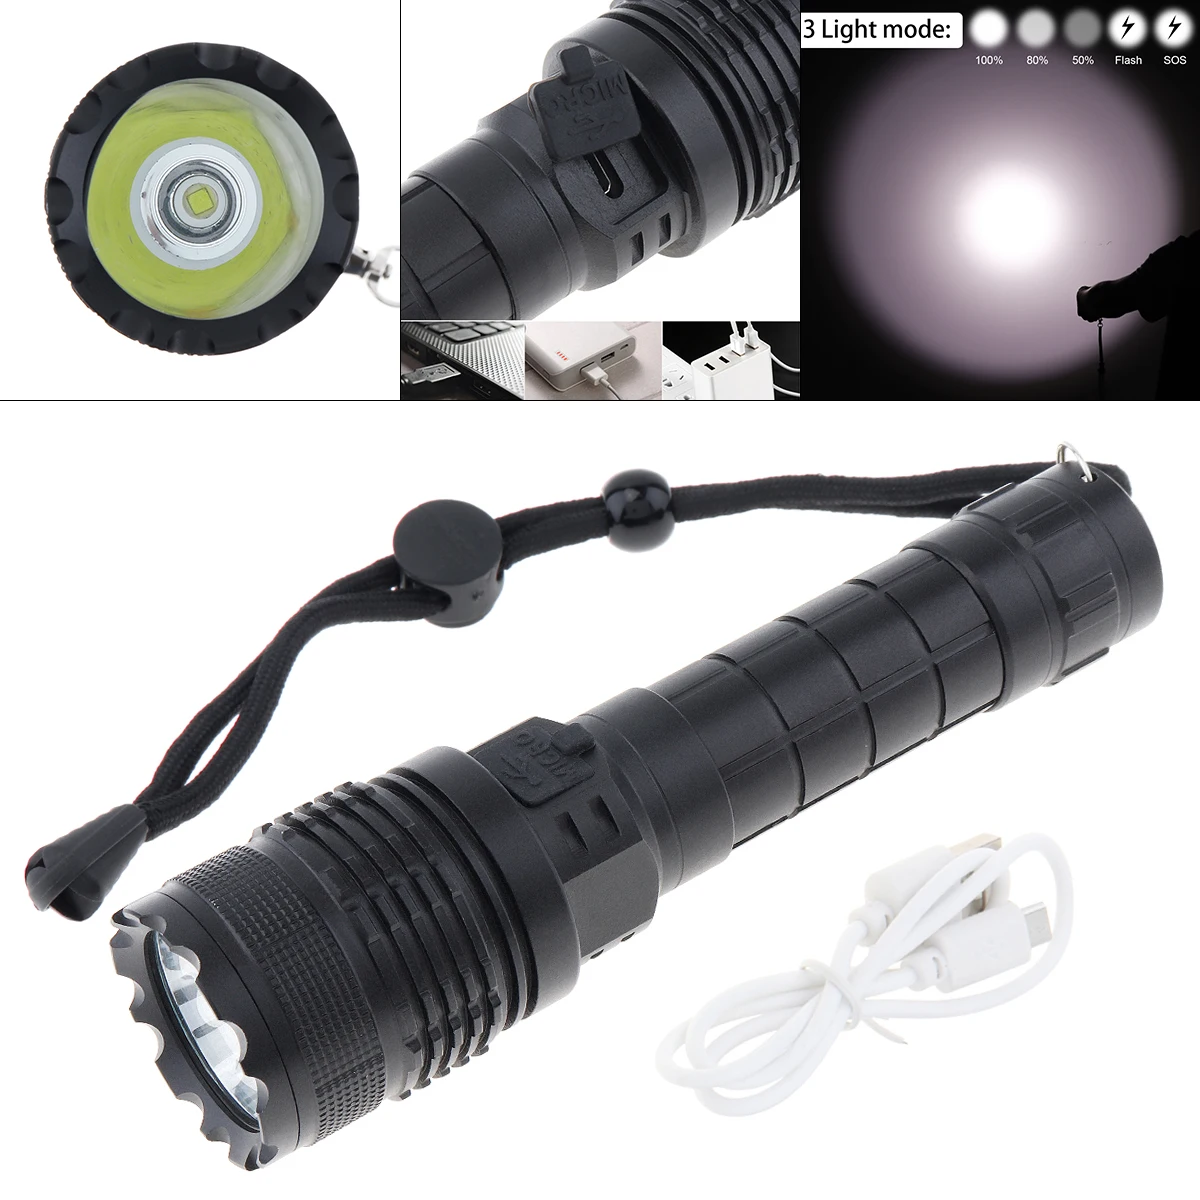 

B97 8000 Lumens 5 Modes L2 LED Flashlight Tactical Torch Powerful Usb Rechargeable Hunting Light Use 18650 Battery for Camping